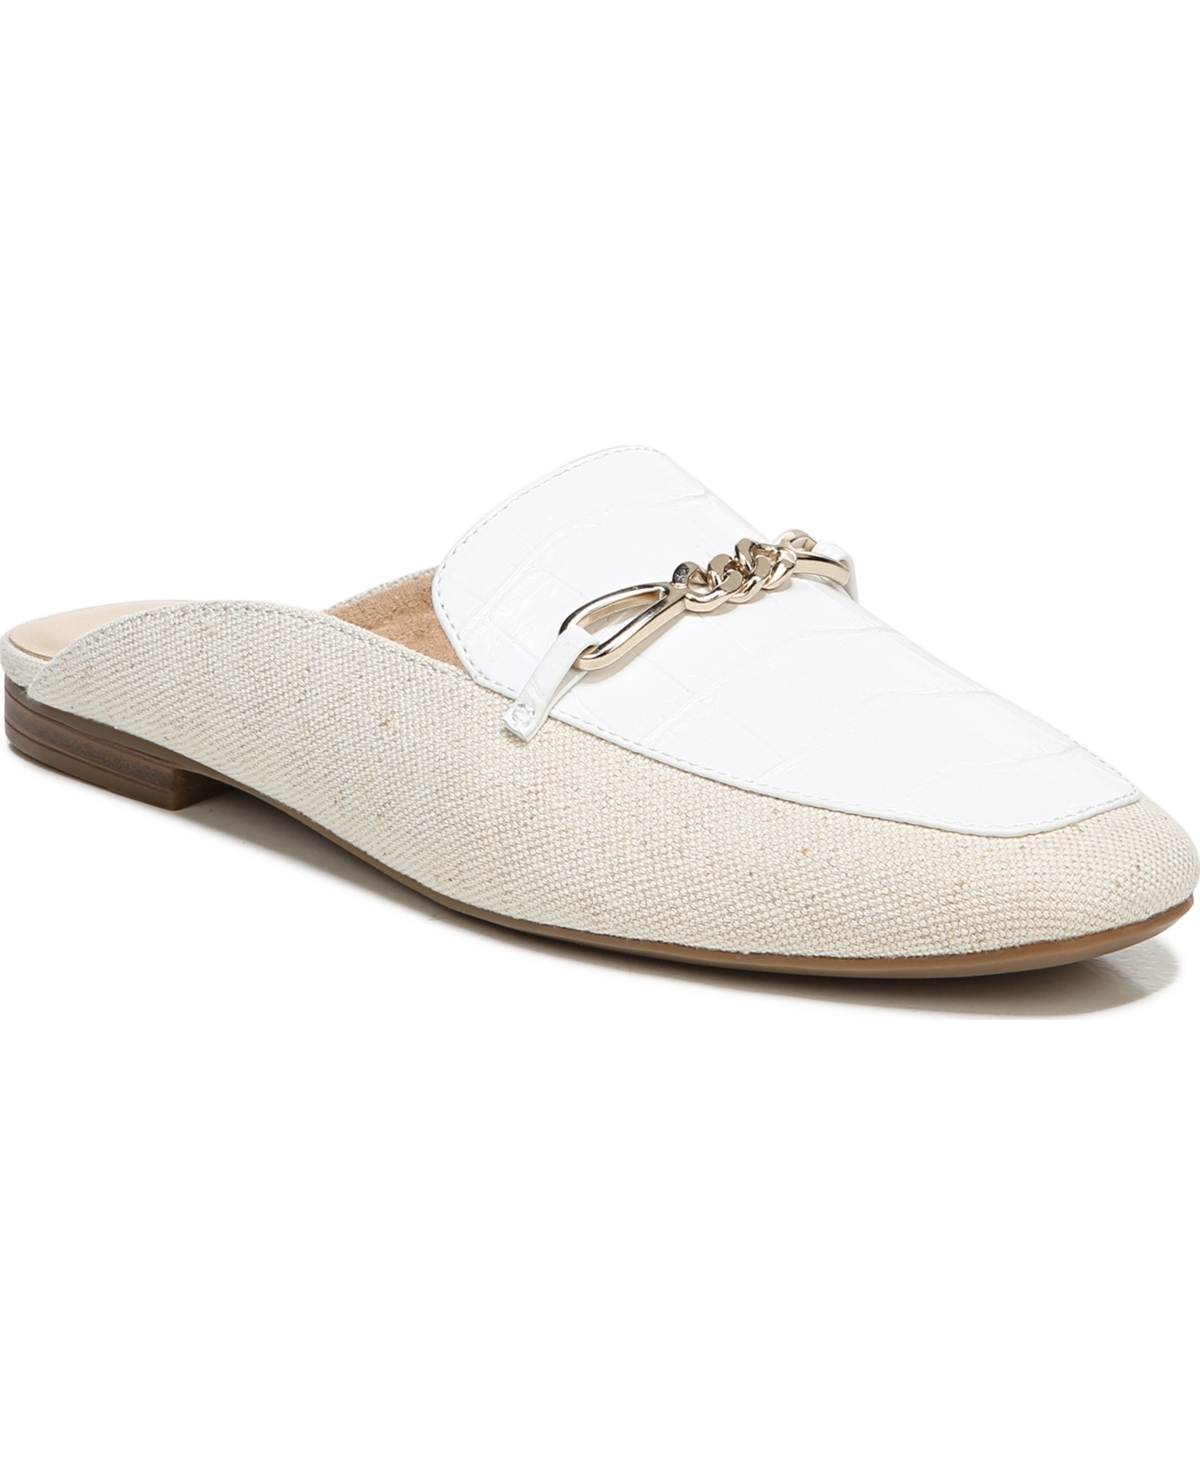 Naturalizer Kayden-mule Mules Women's Shoes In White Faux Leather/linen ...